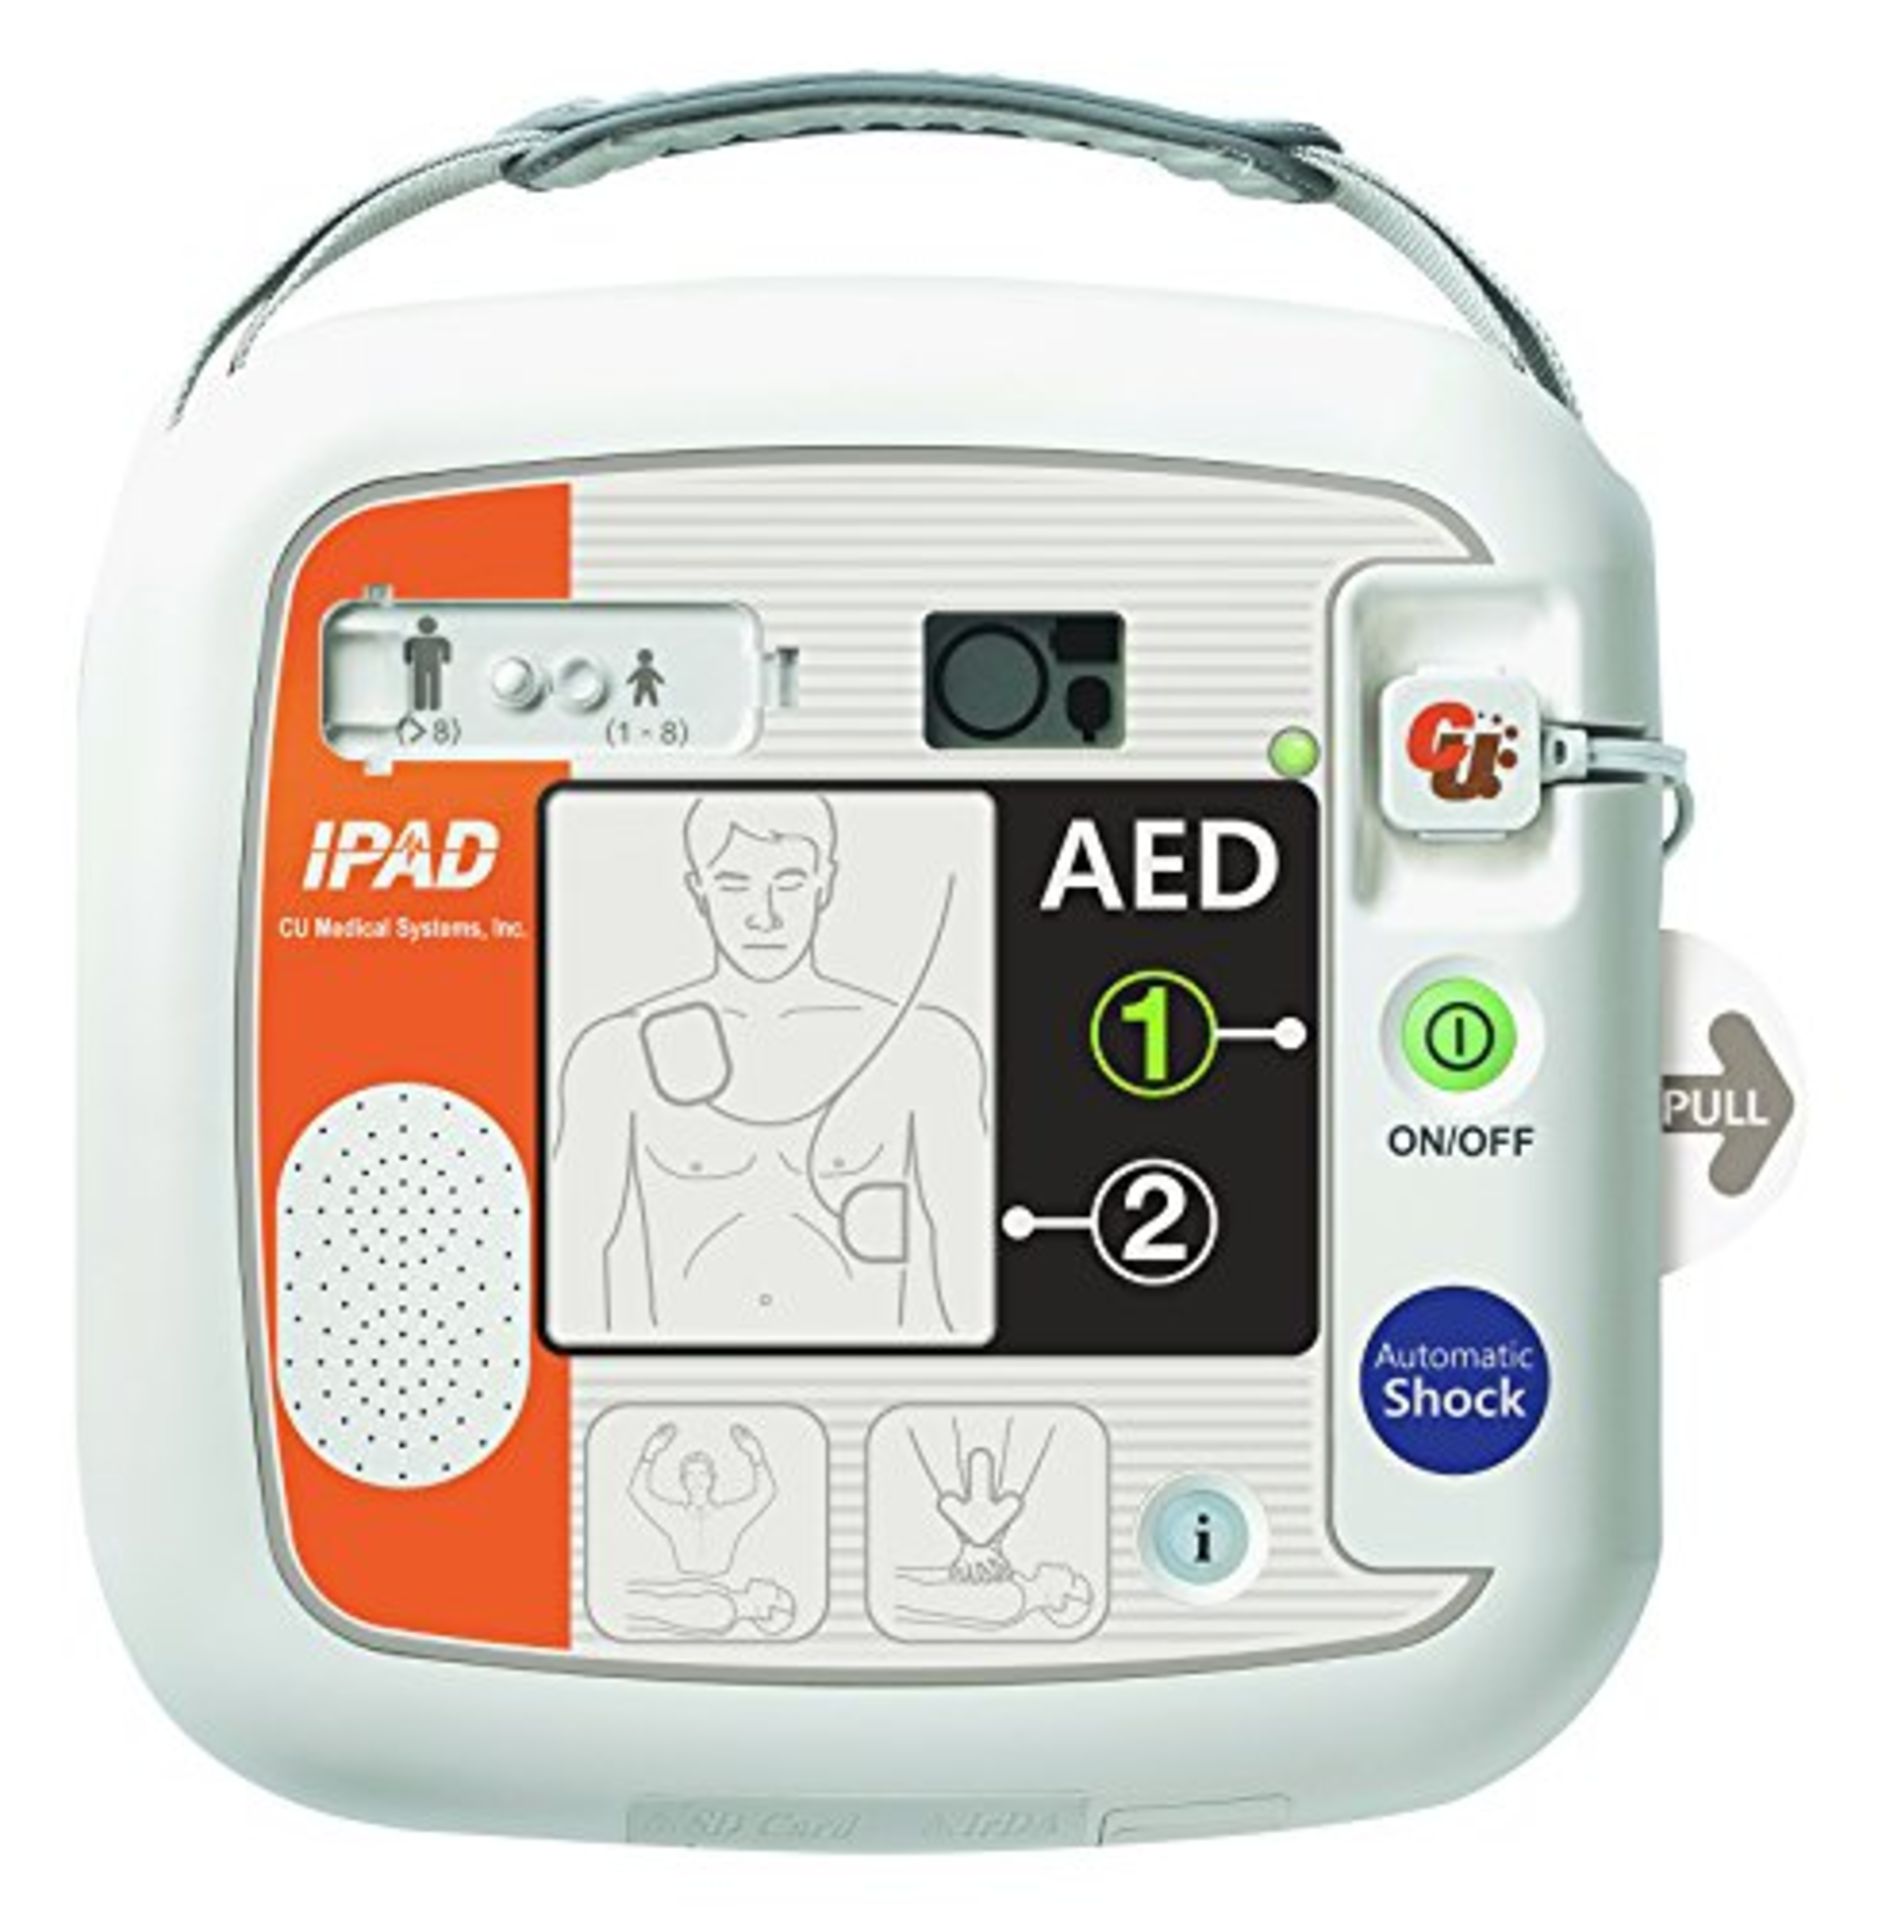 RRP £1206.00 iPAD SP1 AED Fully Automatic Defibrillator